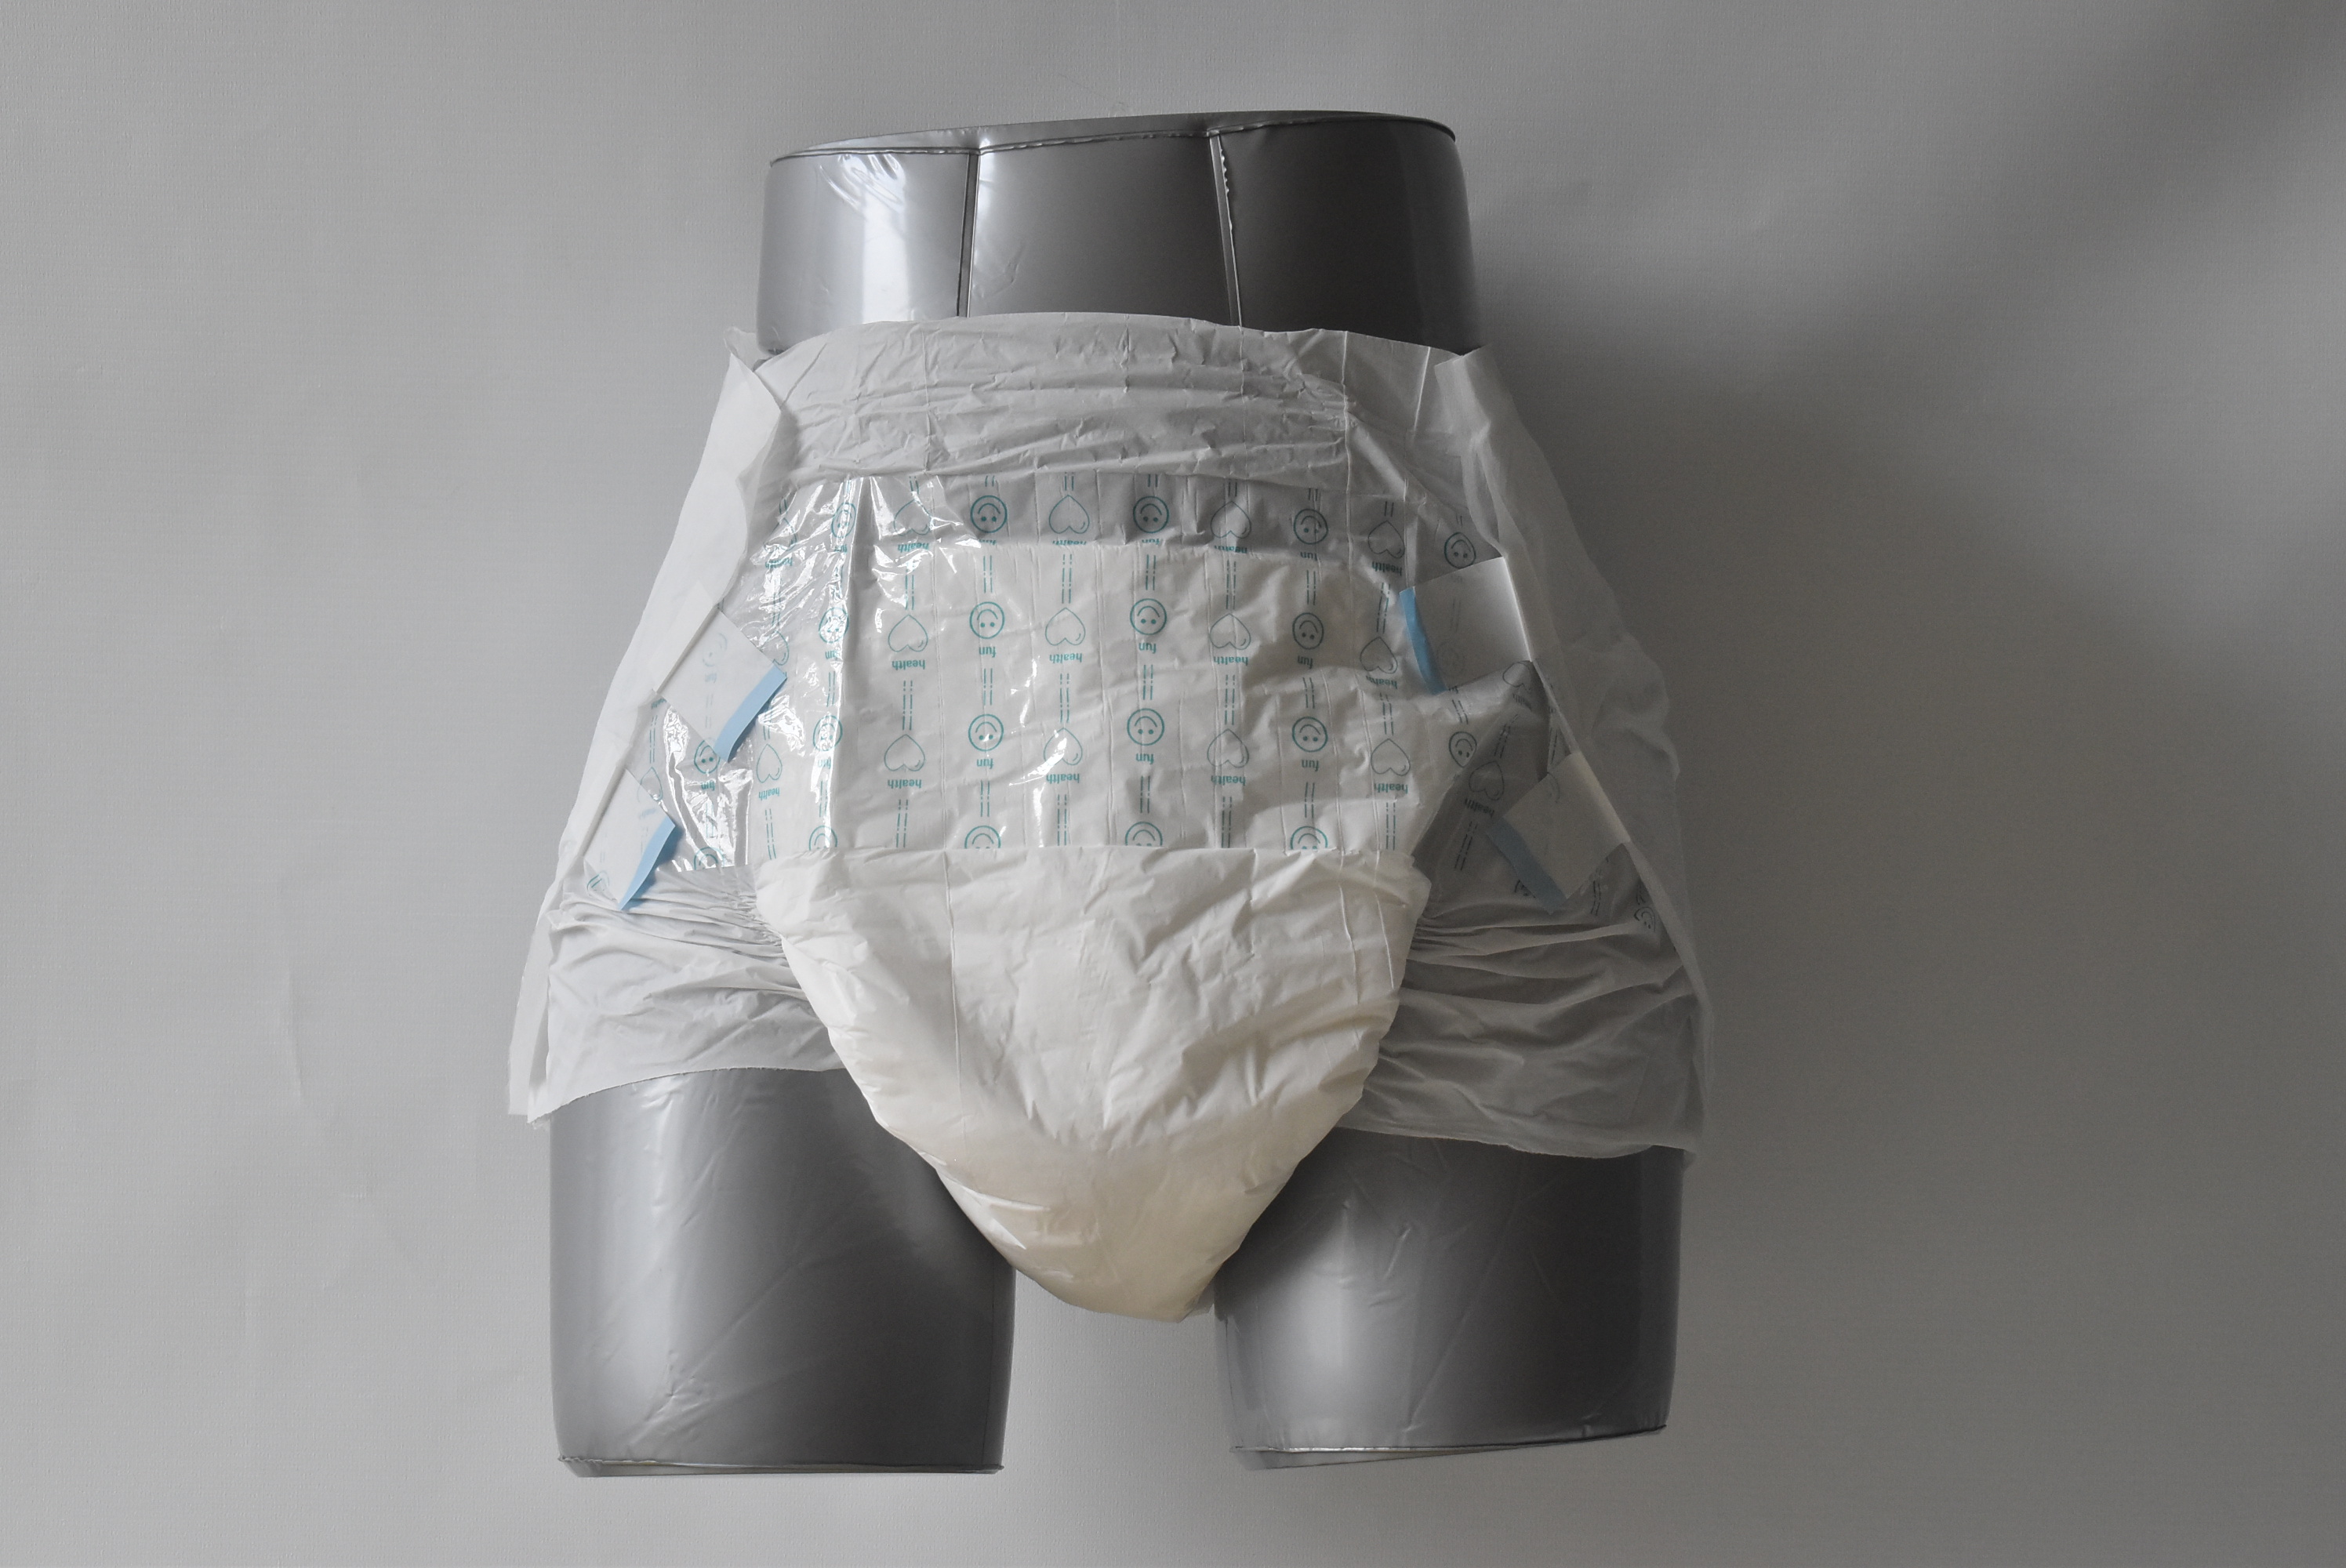 Factory processes disposable adult diapers